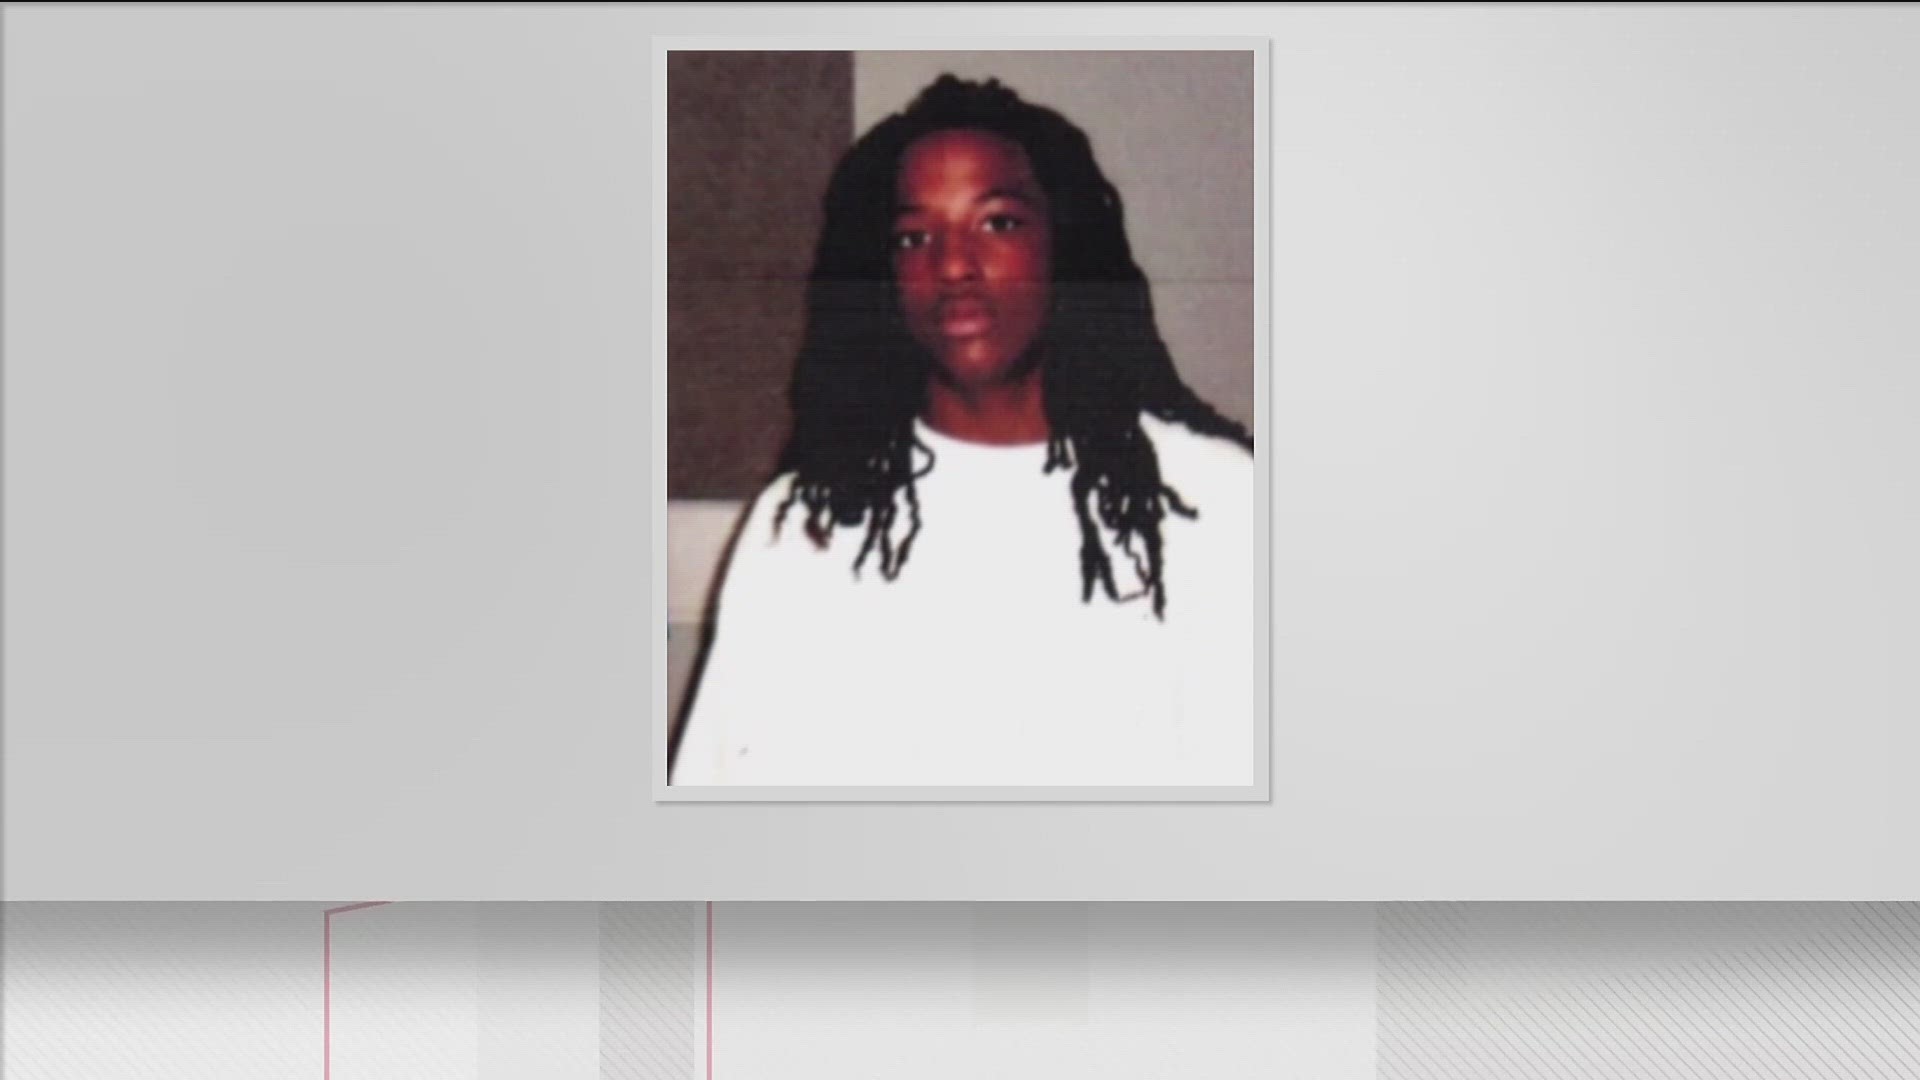 No arrest has ever been made in the case of Kendrick Johnson, who was 17 at the time he was found dead in 2013.